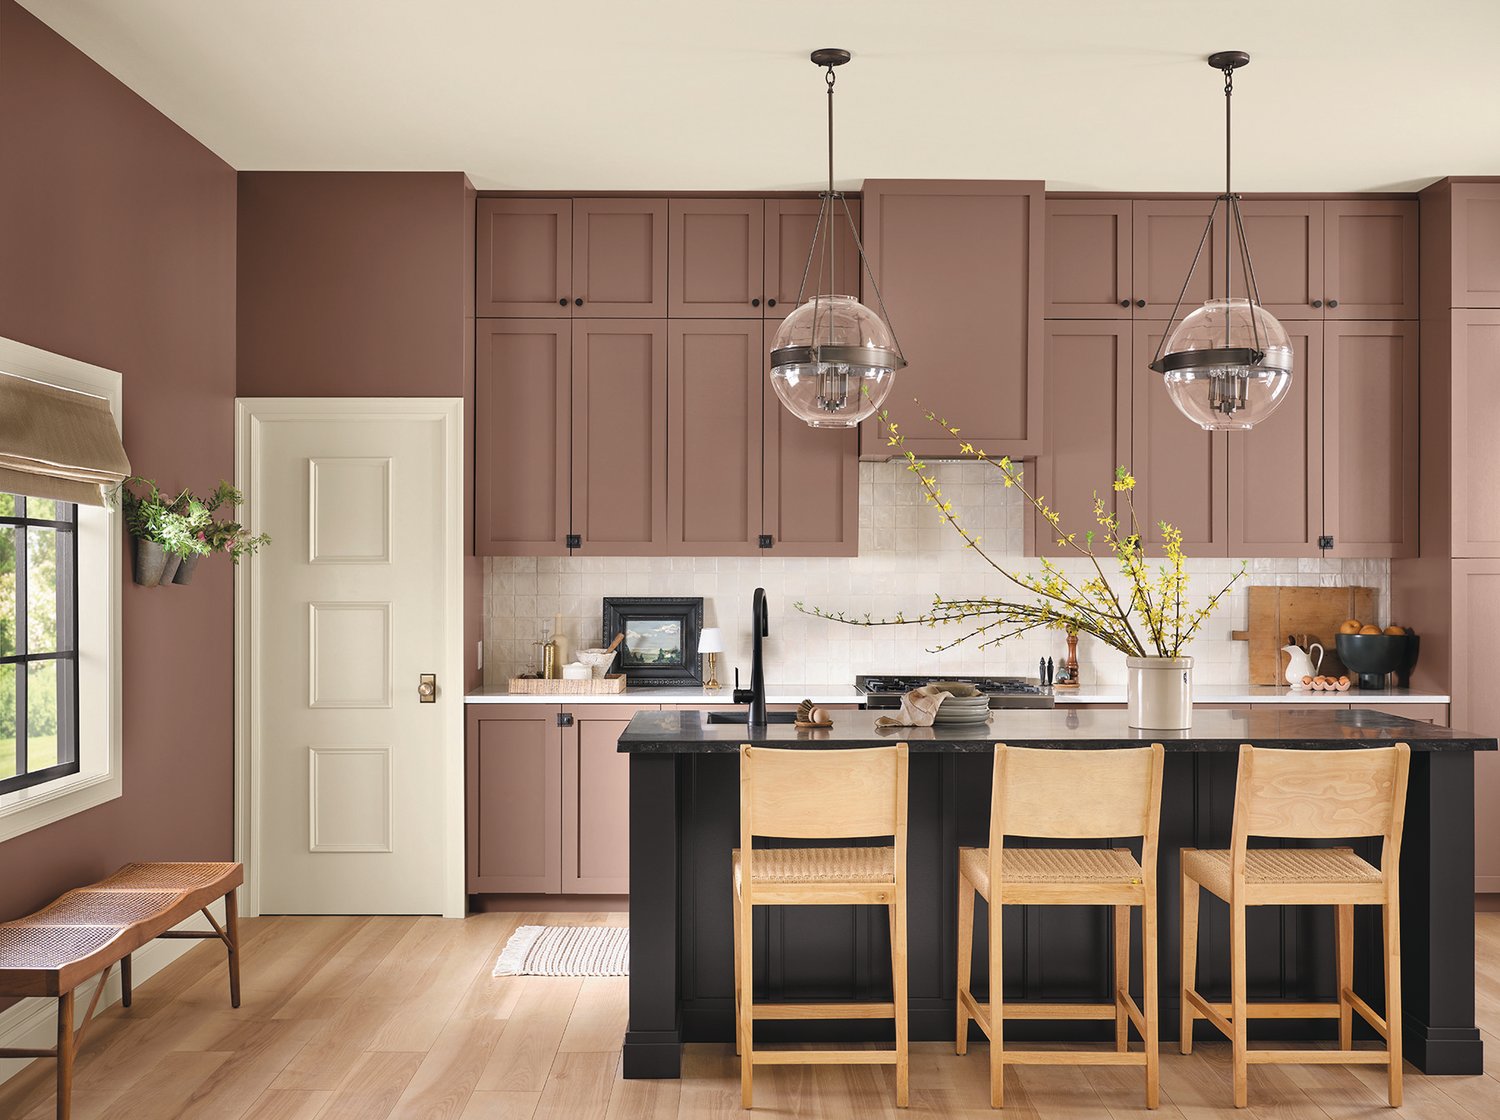 The Sherwin Williams Color Collection of the Year borrows the colors of the past to evoke comfort now.